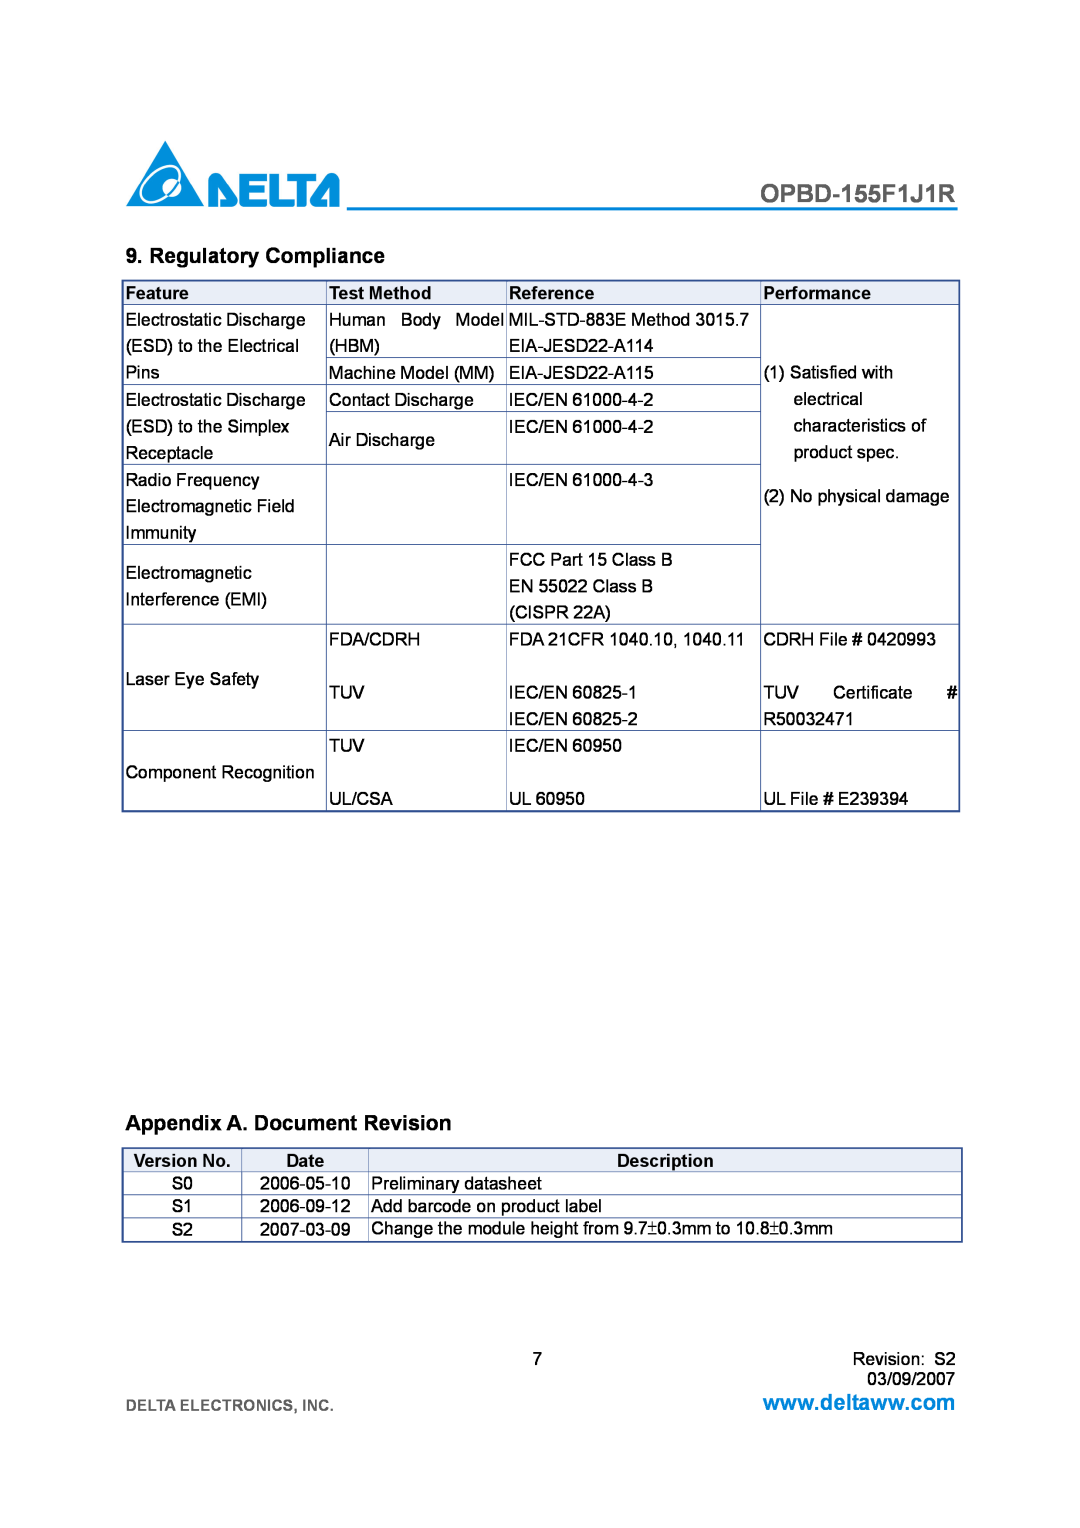 Delta Electronics OPBD-155F1J1R Regulatory Compliance, Appendix A. Document Revision, Feature, Test Method, Reference 